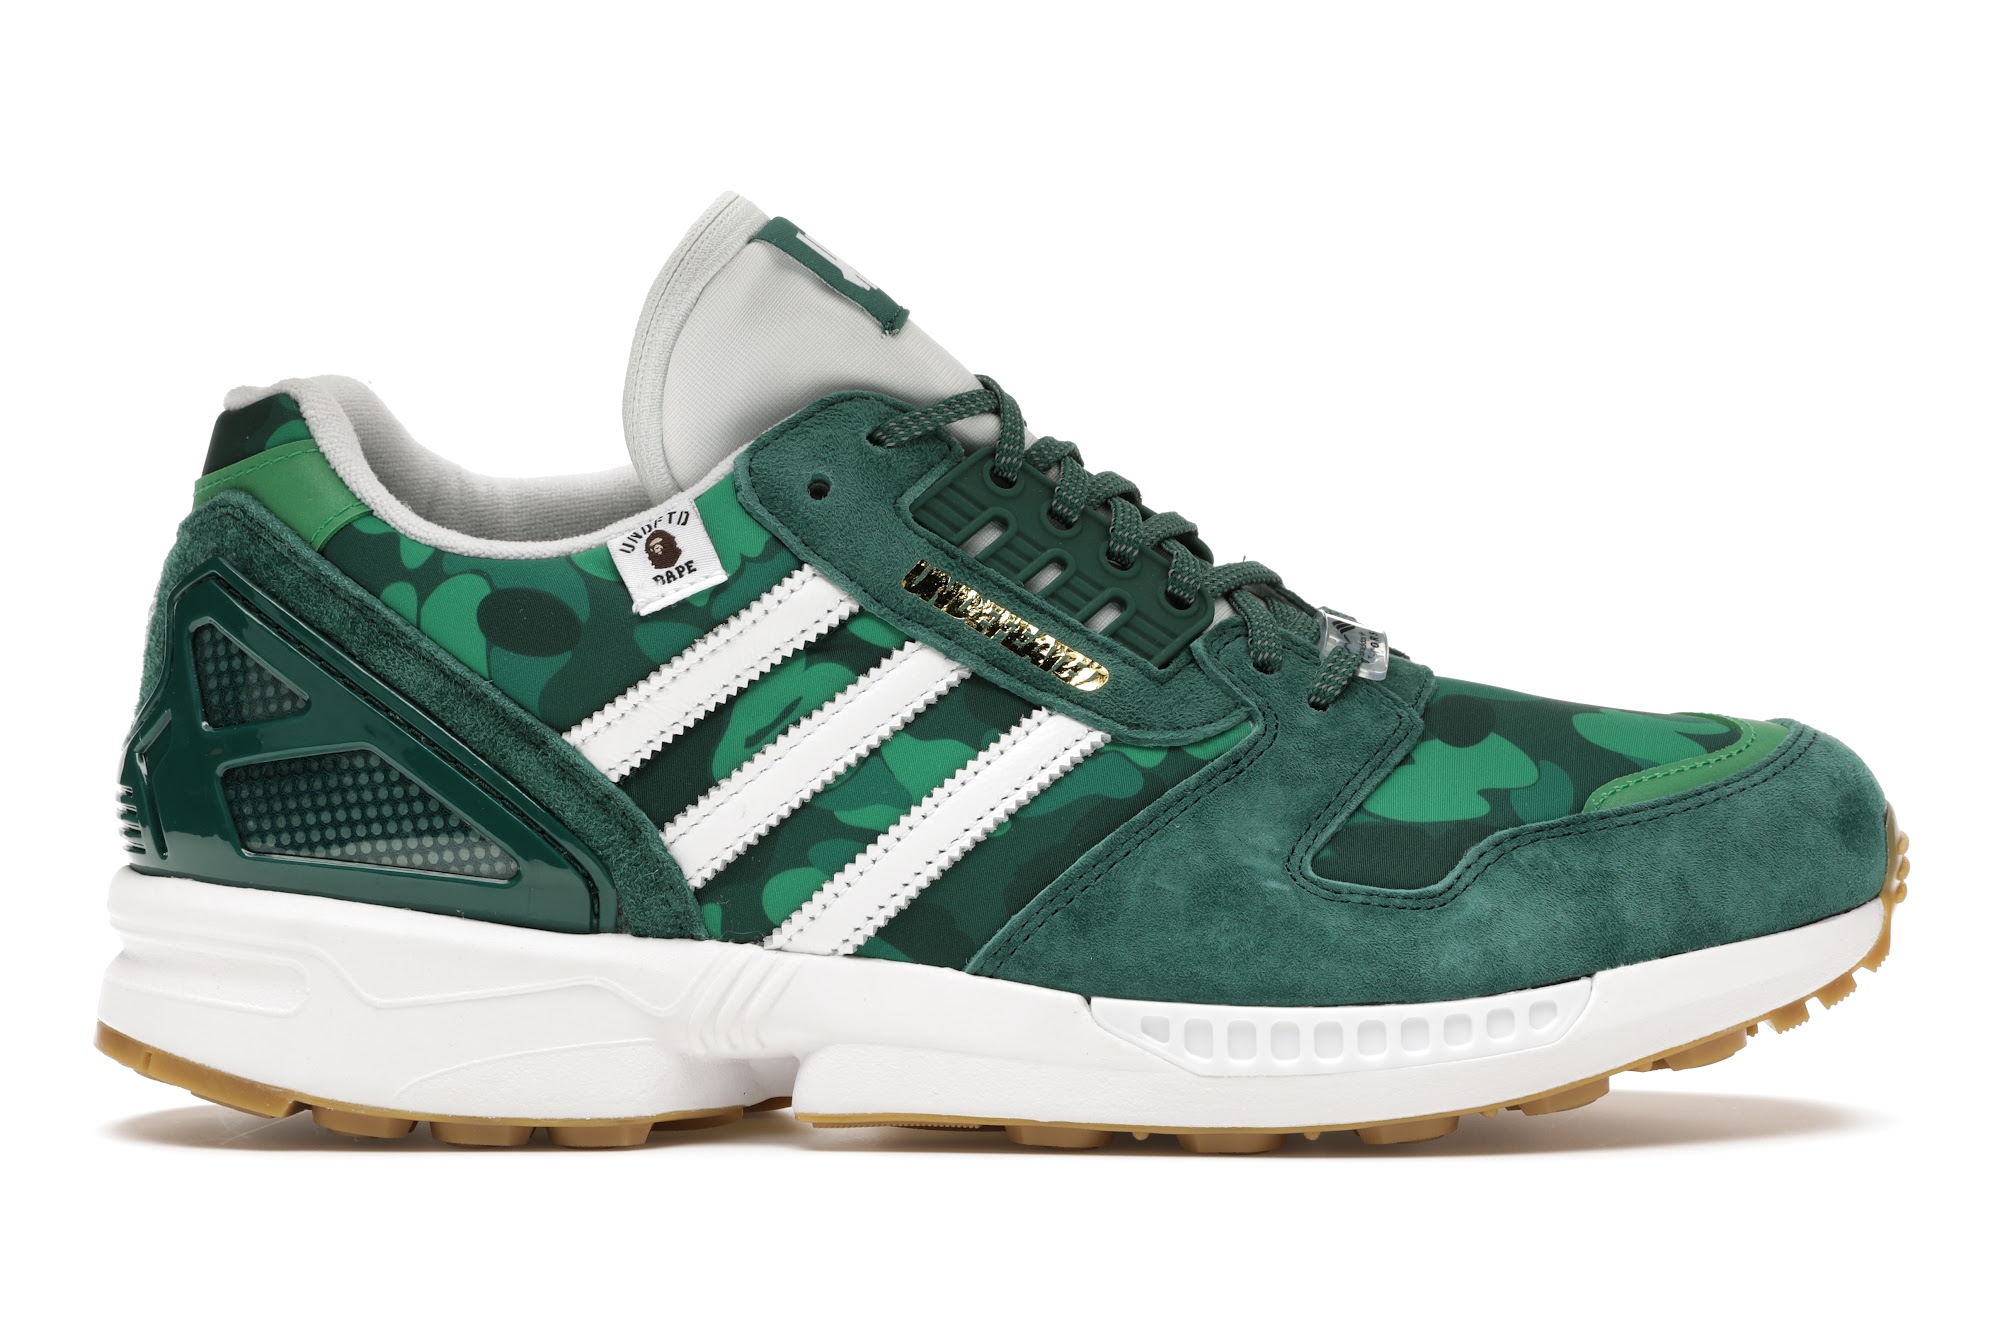 adidas ZX 8000 Bape Undefeated Green Men's - FY8851 - US